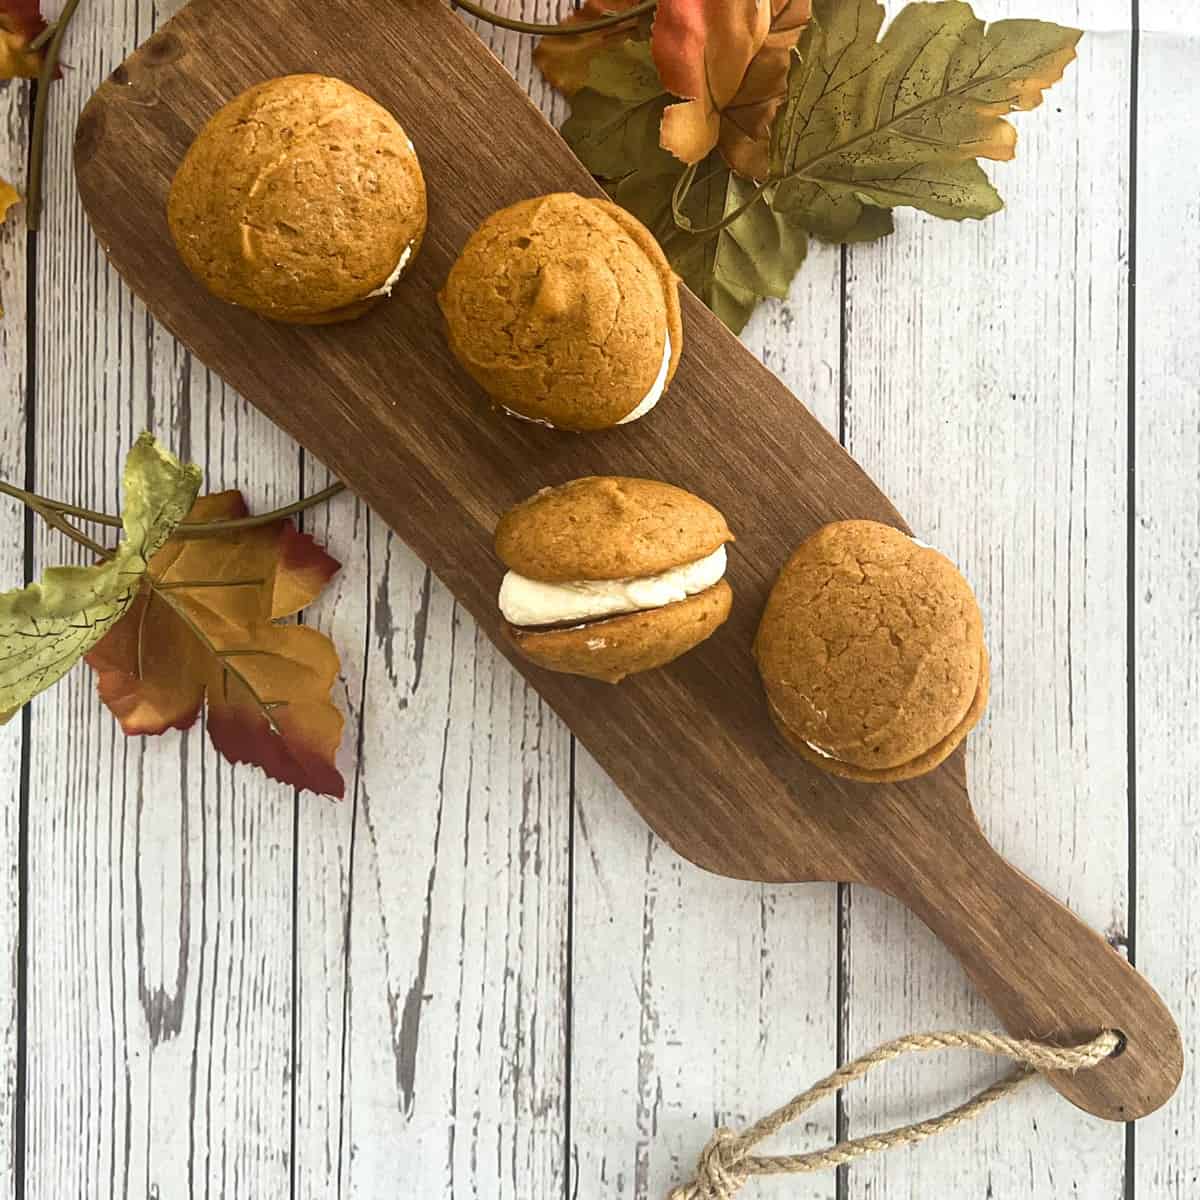  A close-up photo of a five-ingredient pumpkin whoopie pie. The whoopie pie is made with two soft and chewy pumpkin cookies sandwiched together with a creamy filling. The cookies are topped with a sprinkle of pumpkin pie spice